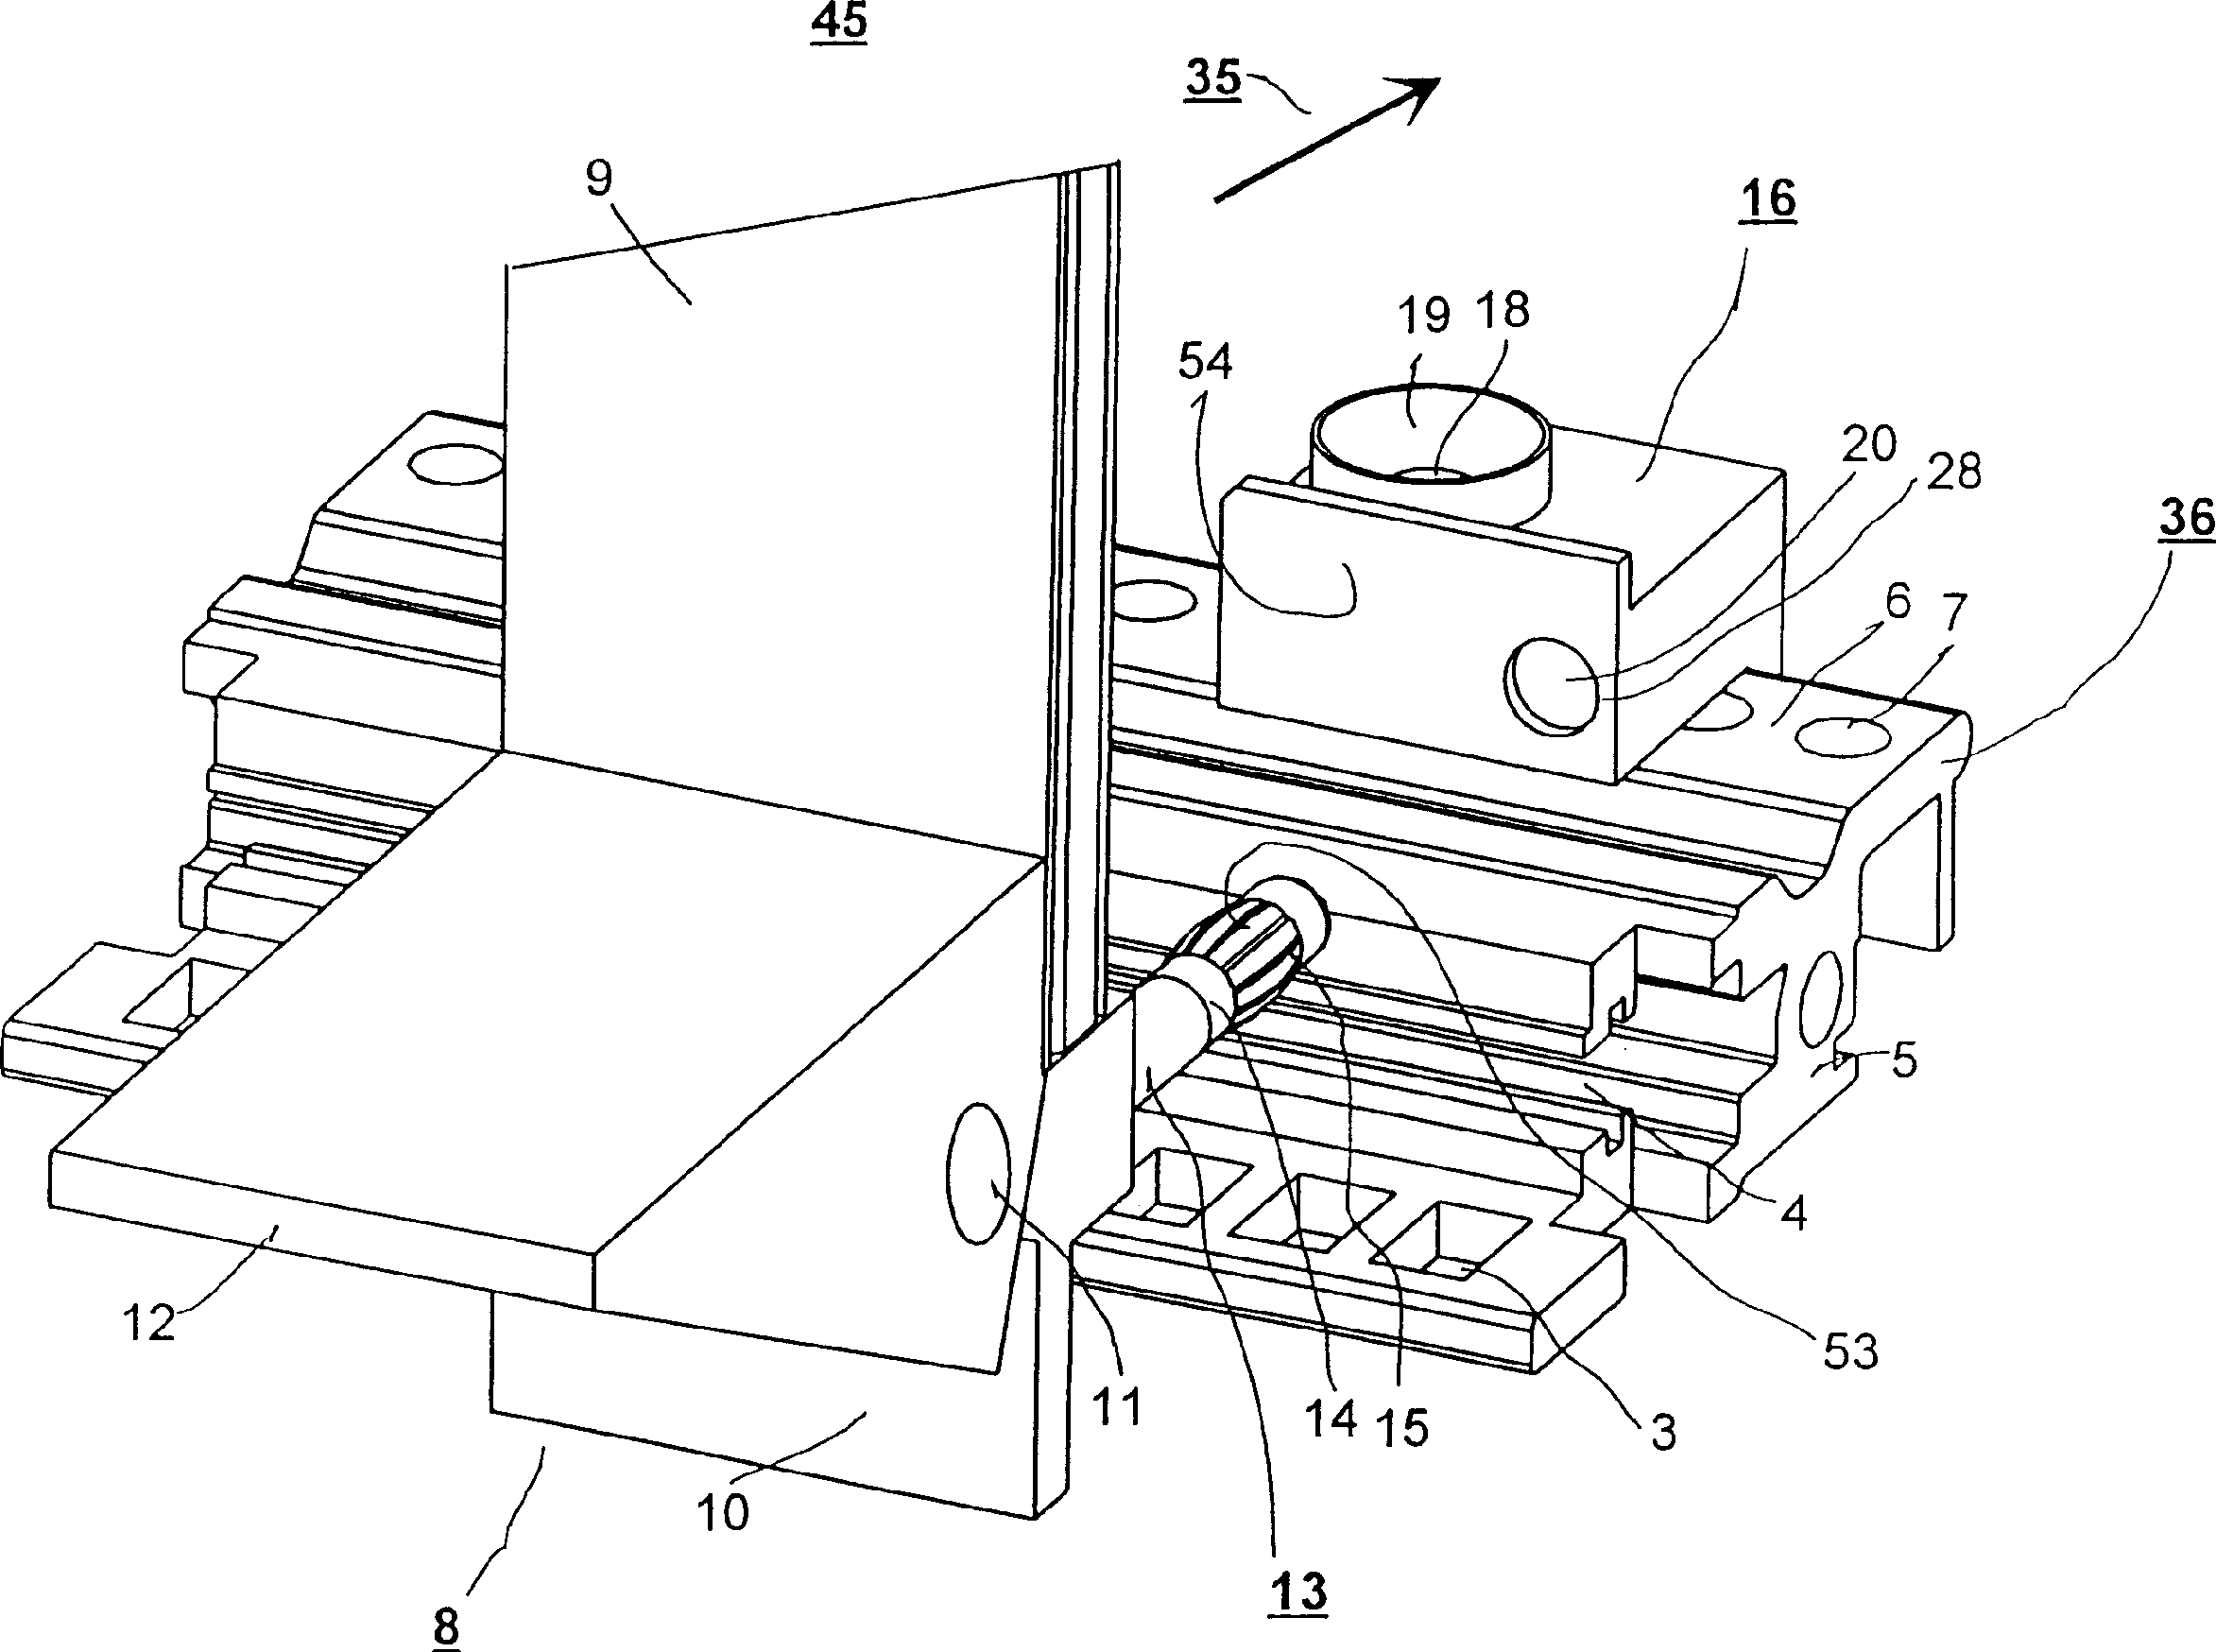 Rack system for inserting electrical printed circuit boards